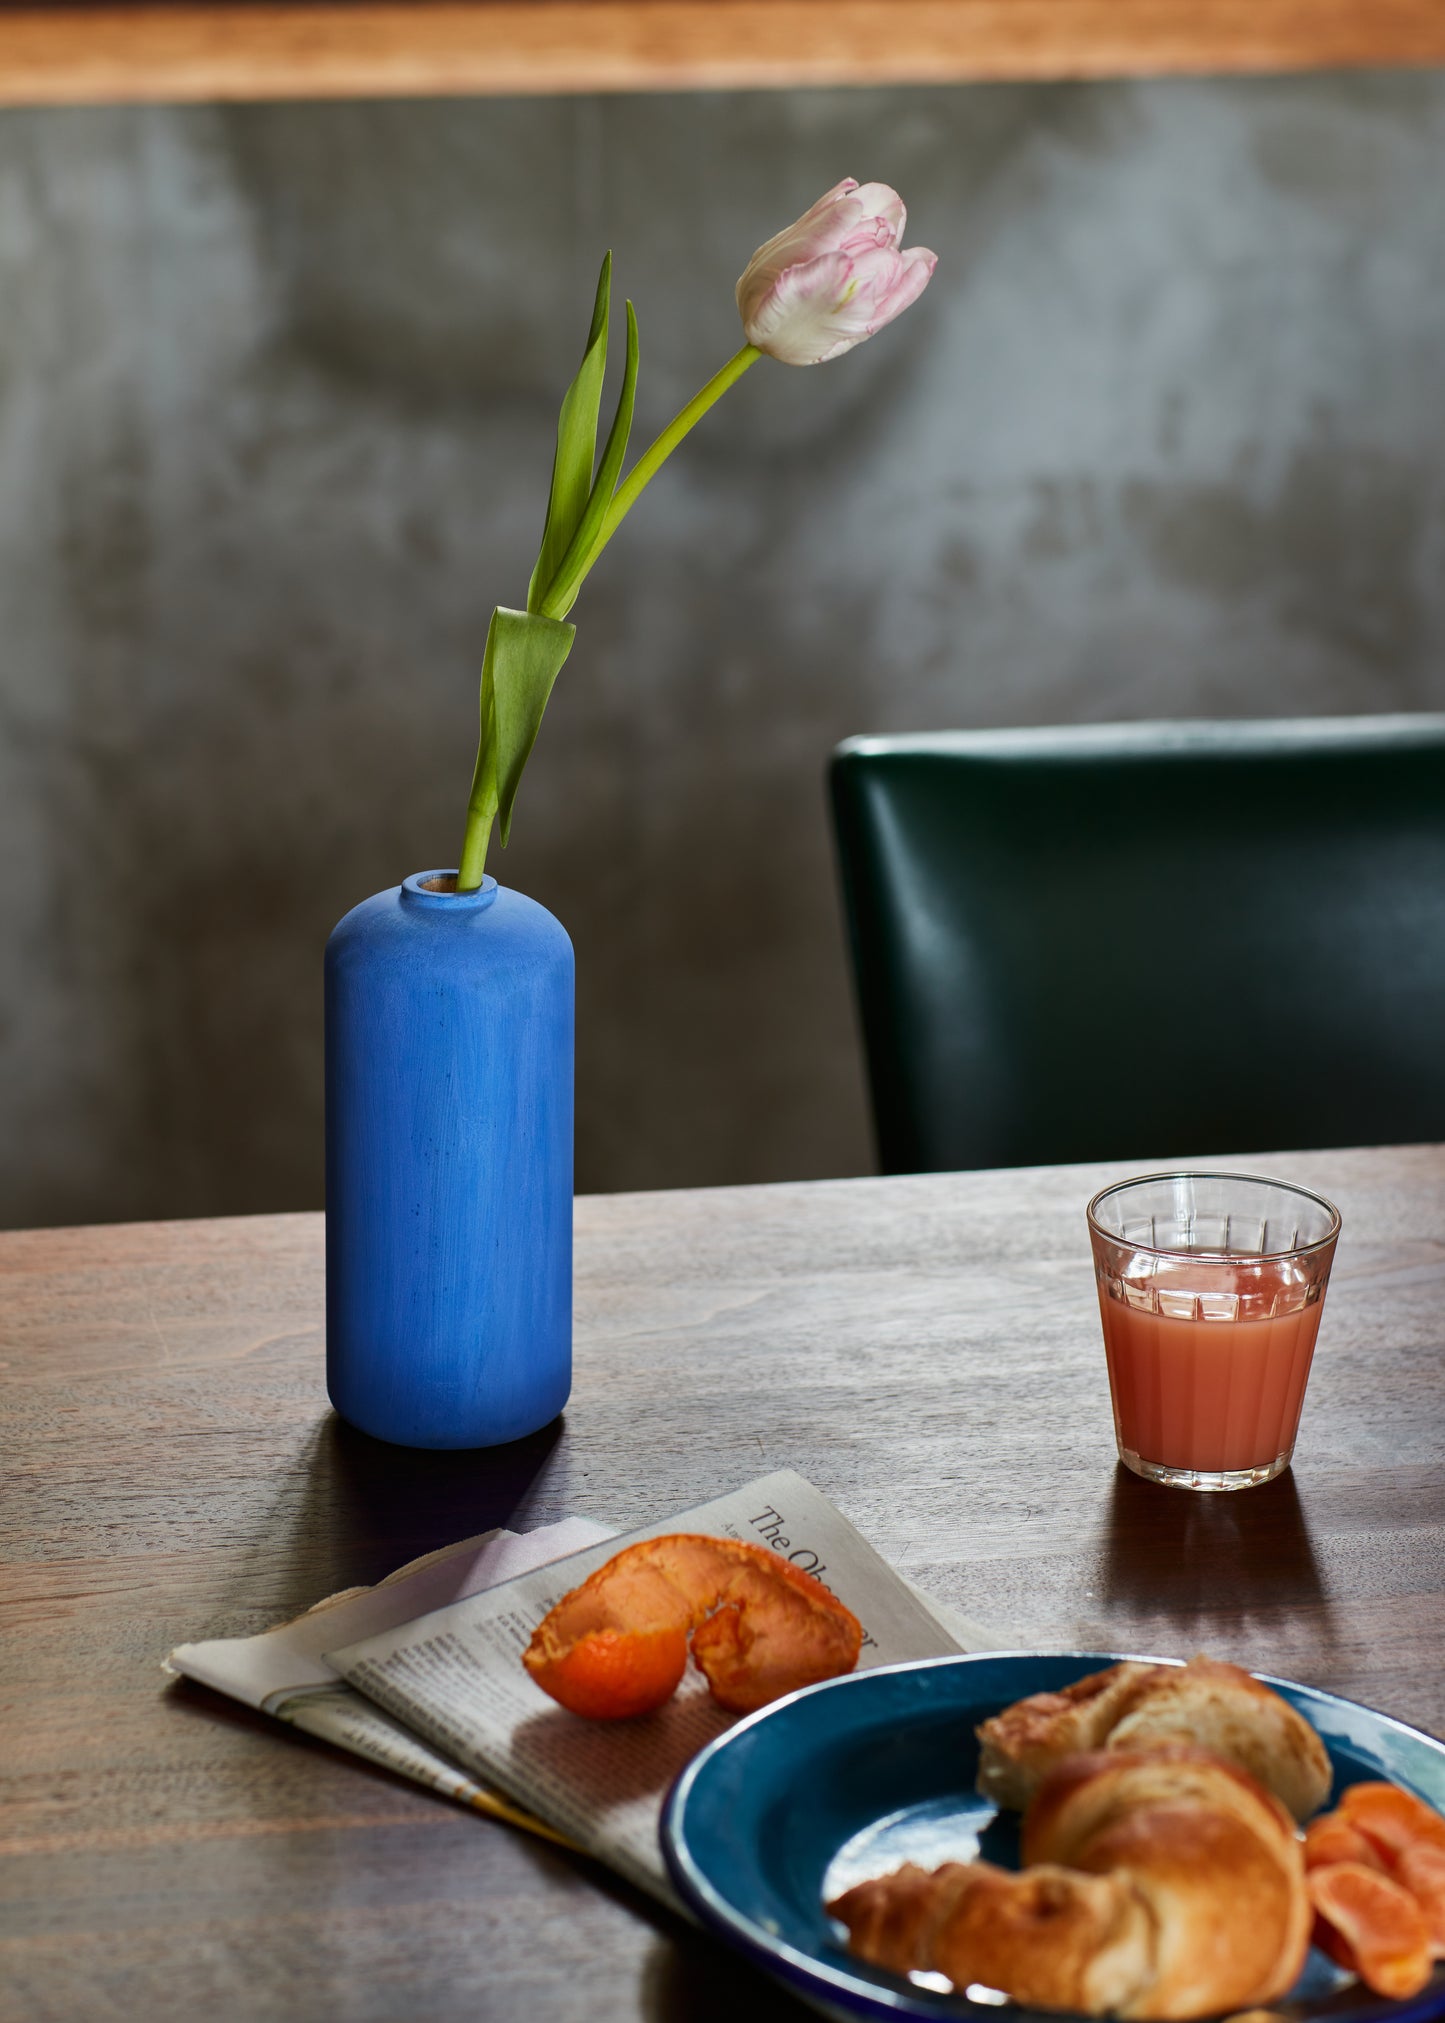 Tall bud vase in cobalt blue with lily flower. Set on a wood table with a morning breakfast. By Melanie Abrantes Designs.